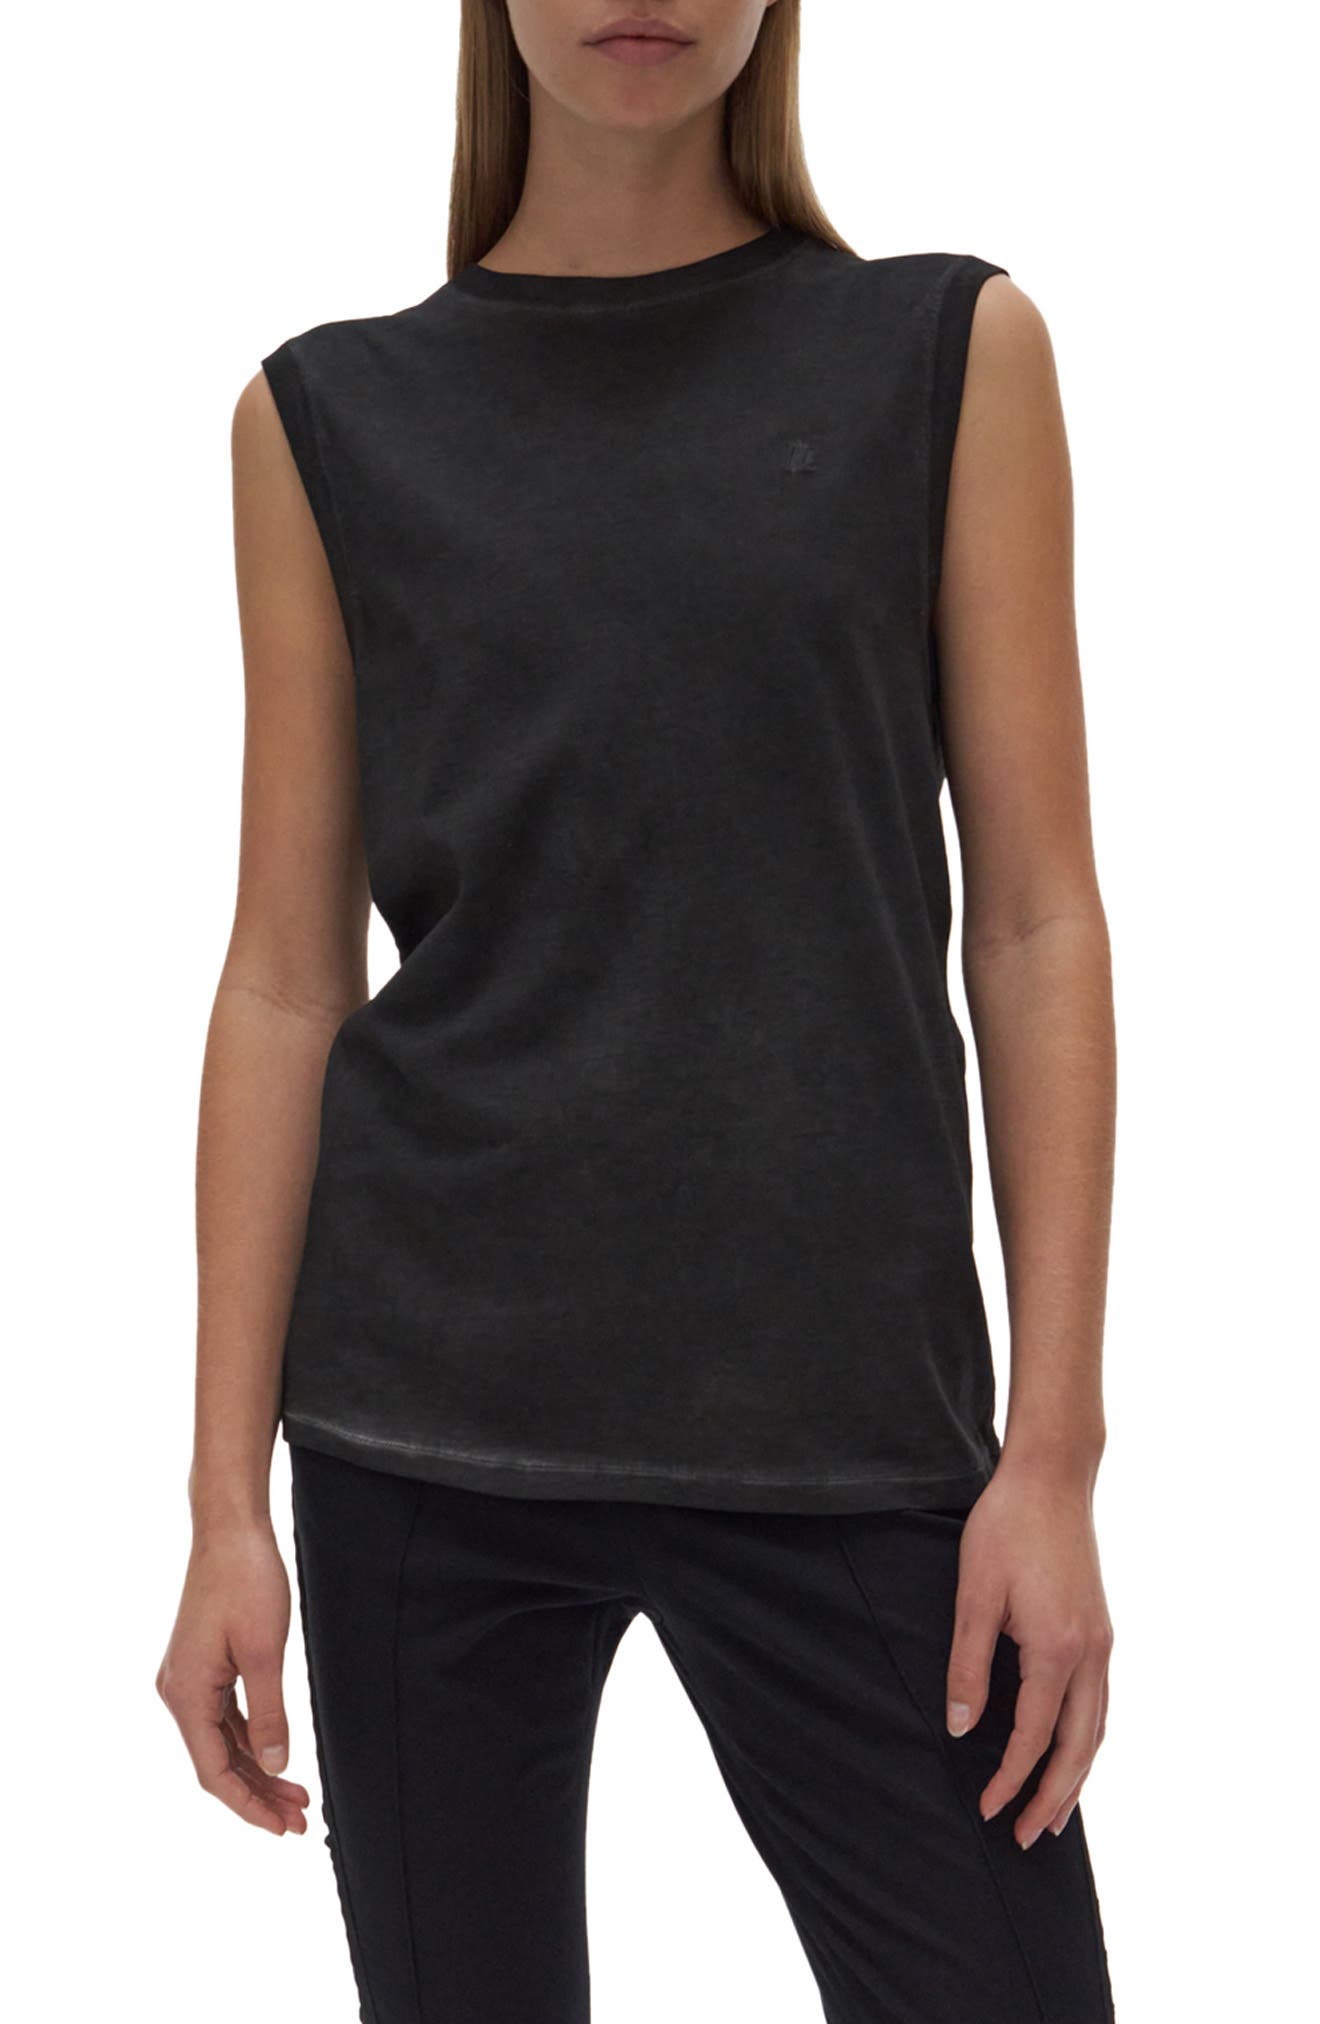 Helmut Lang Muscle T-Shirt in Charcoal at Nordstrom, Size Large